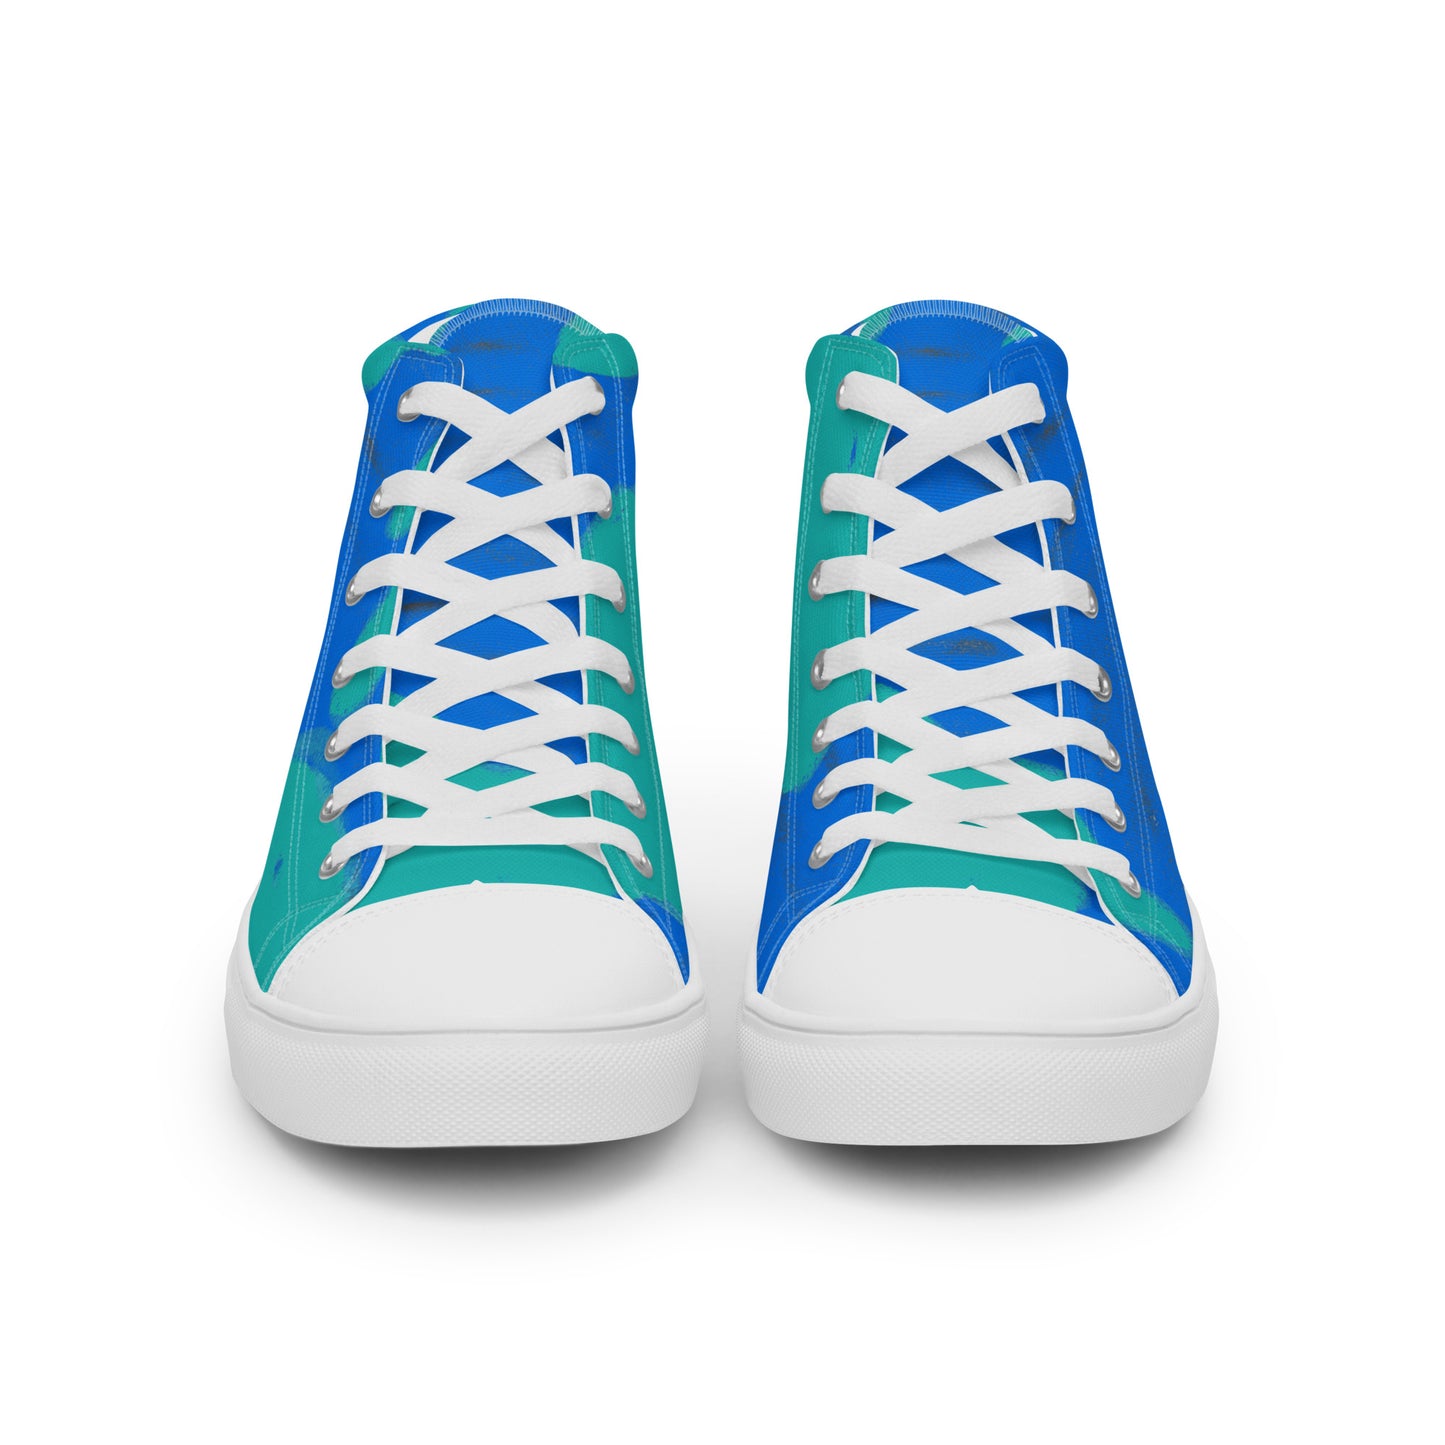 Earth - Men’s high top canvas shoes